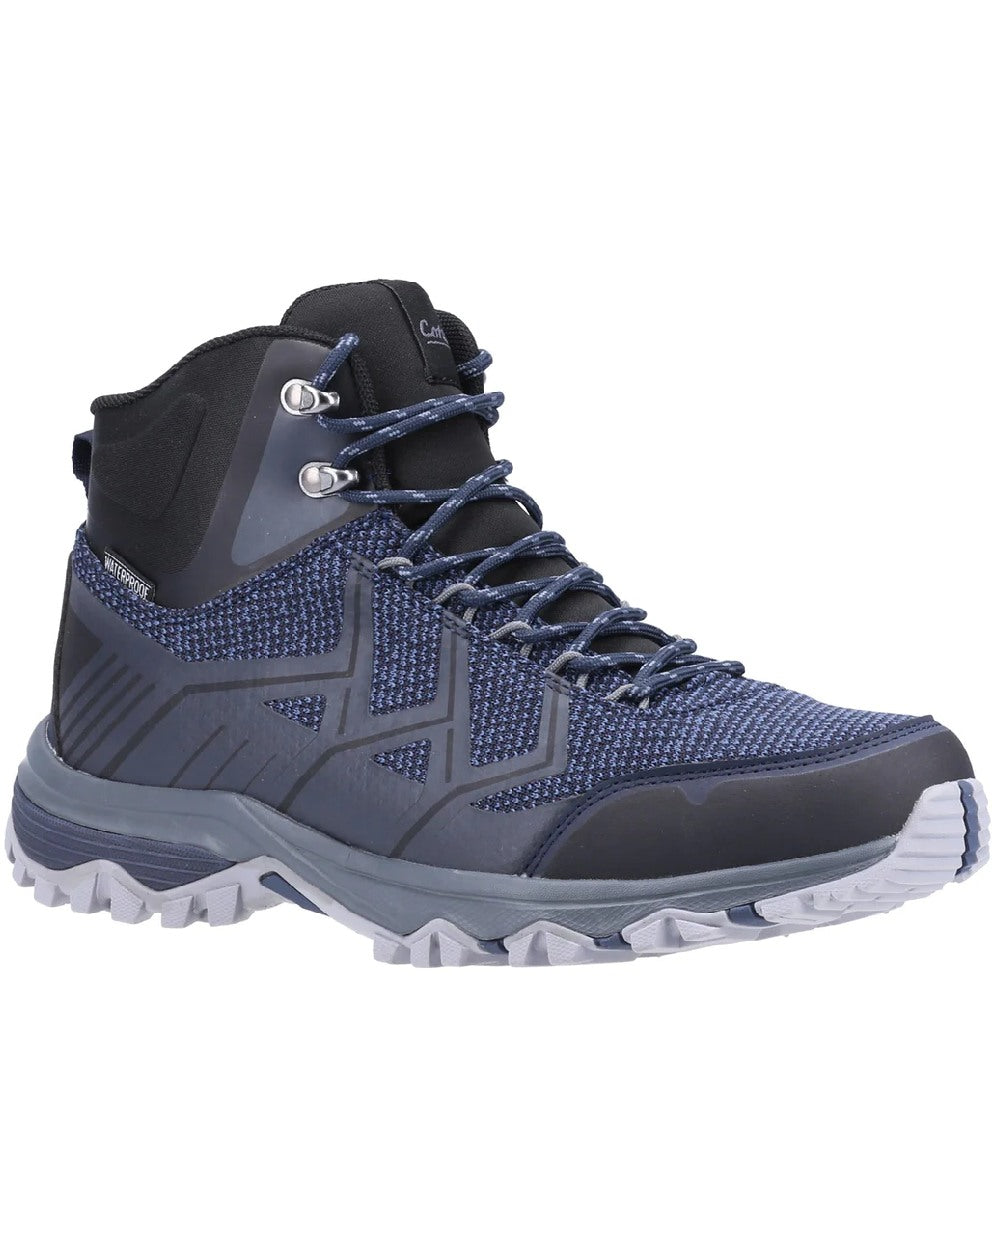 Cotswold Mens Wychwood Recycled Hiking Boots in Navy Black 